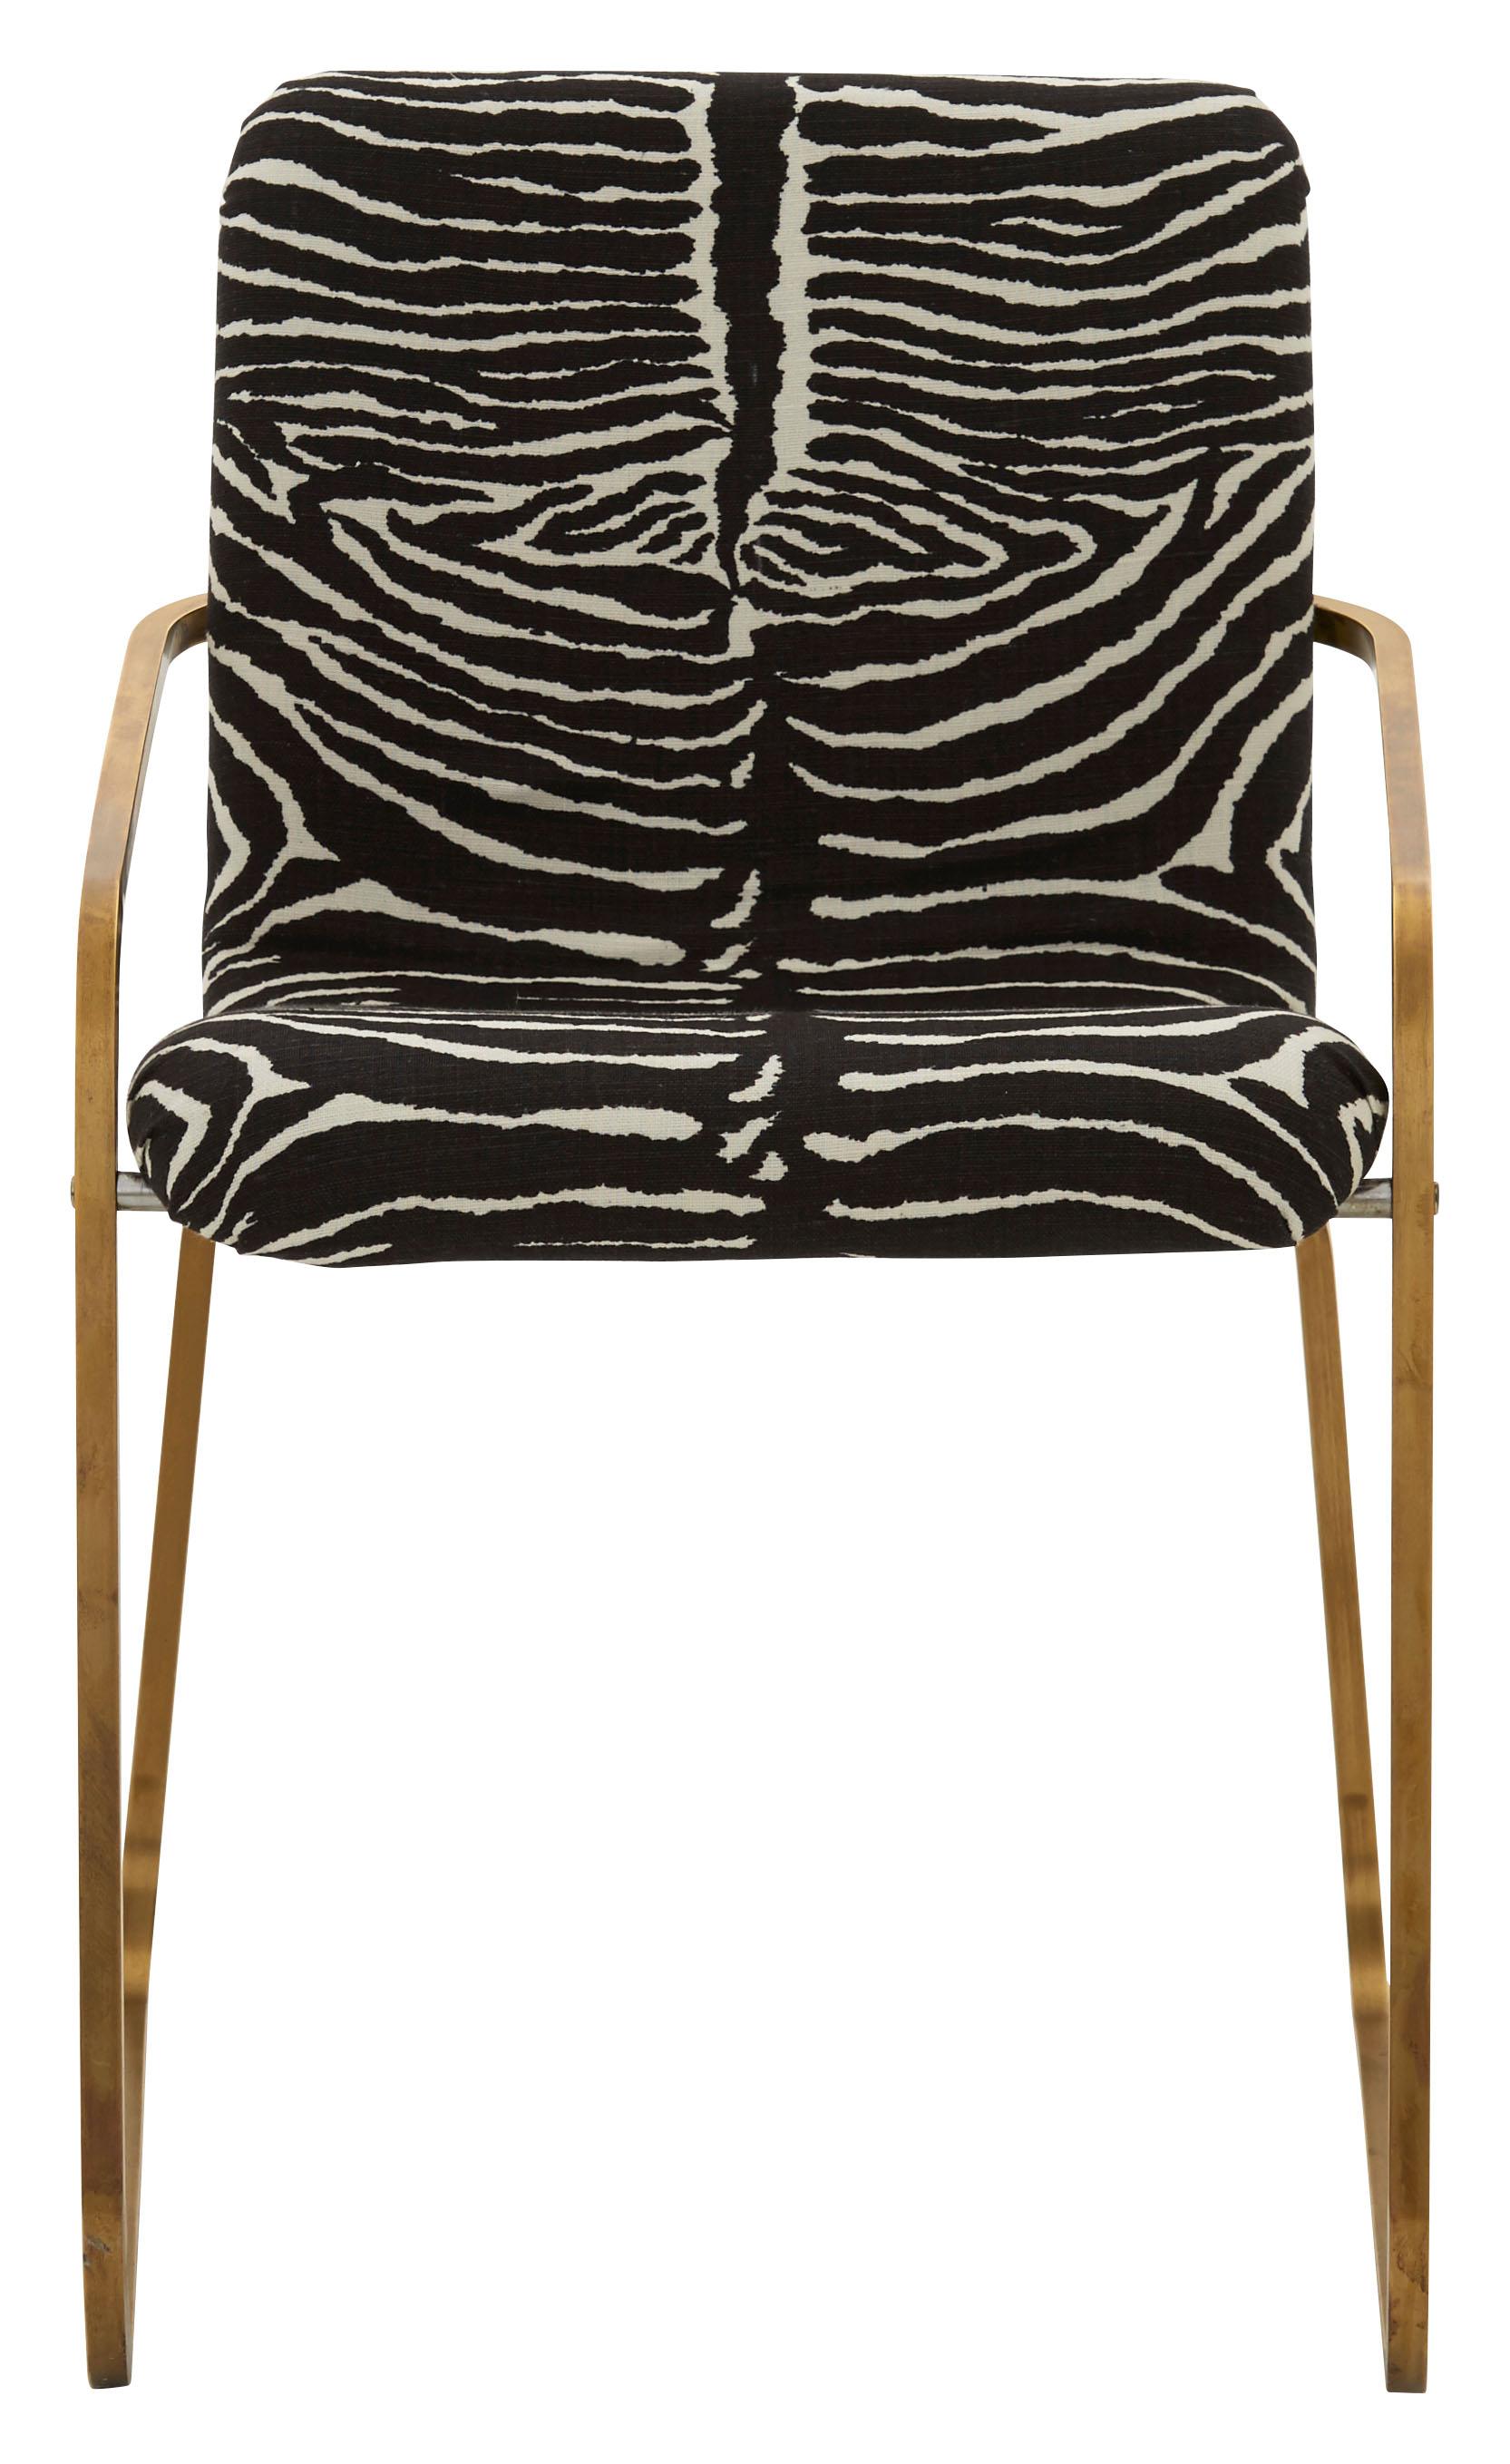 • Designed by Willy Rizzo
• Reupholstered in Brunschwig & Fils Black Le Zebre 100% linen fabric
• Patinaed brass frame,
• circa 1970
• France

Dimensions:
• Overall 19.75